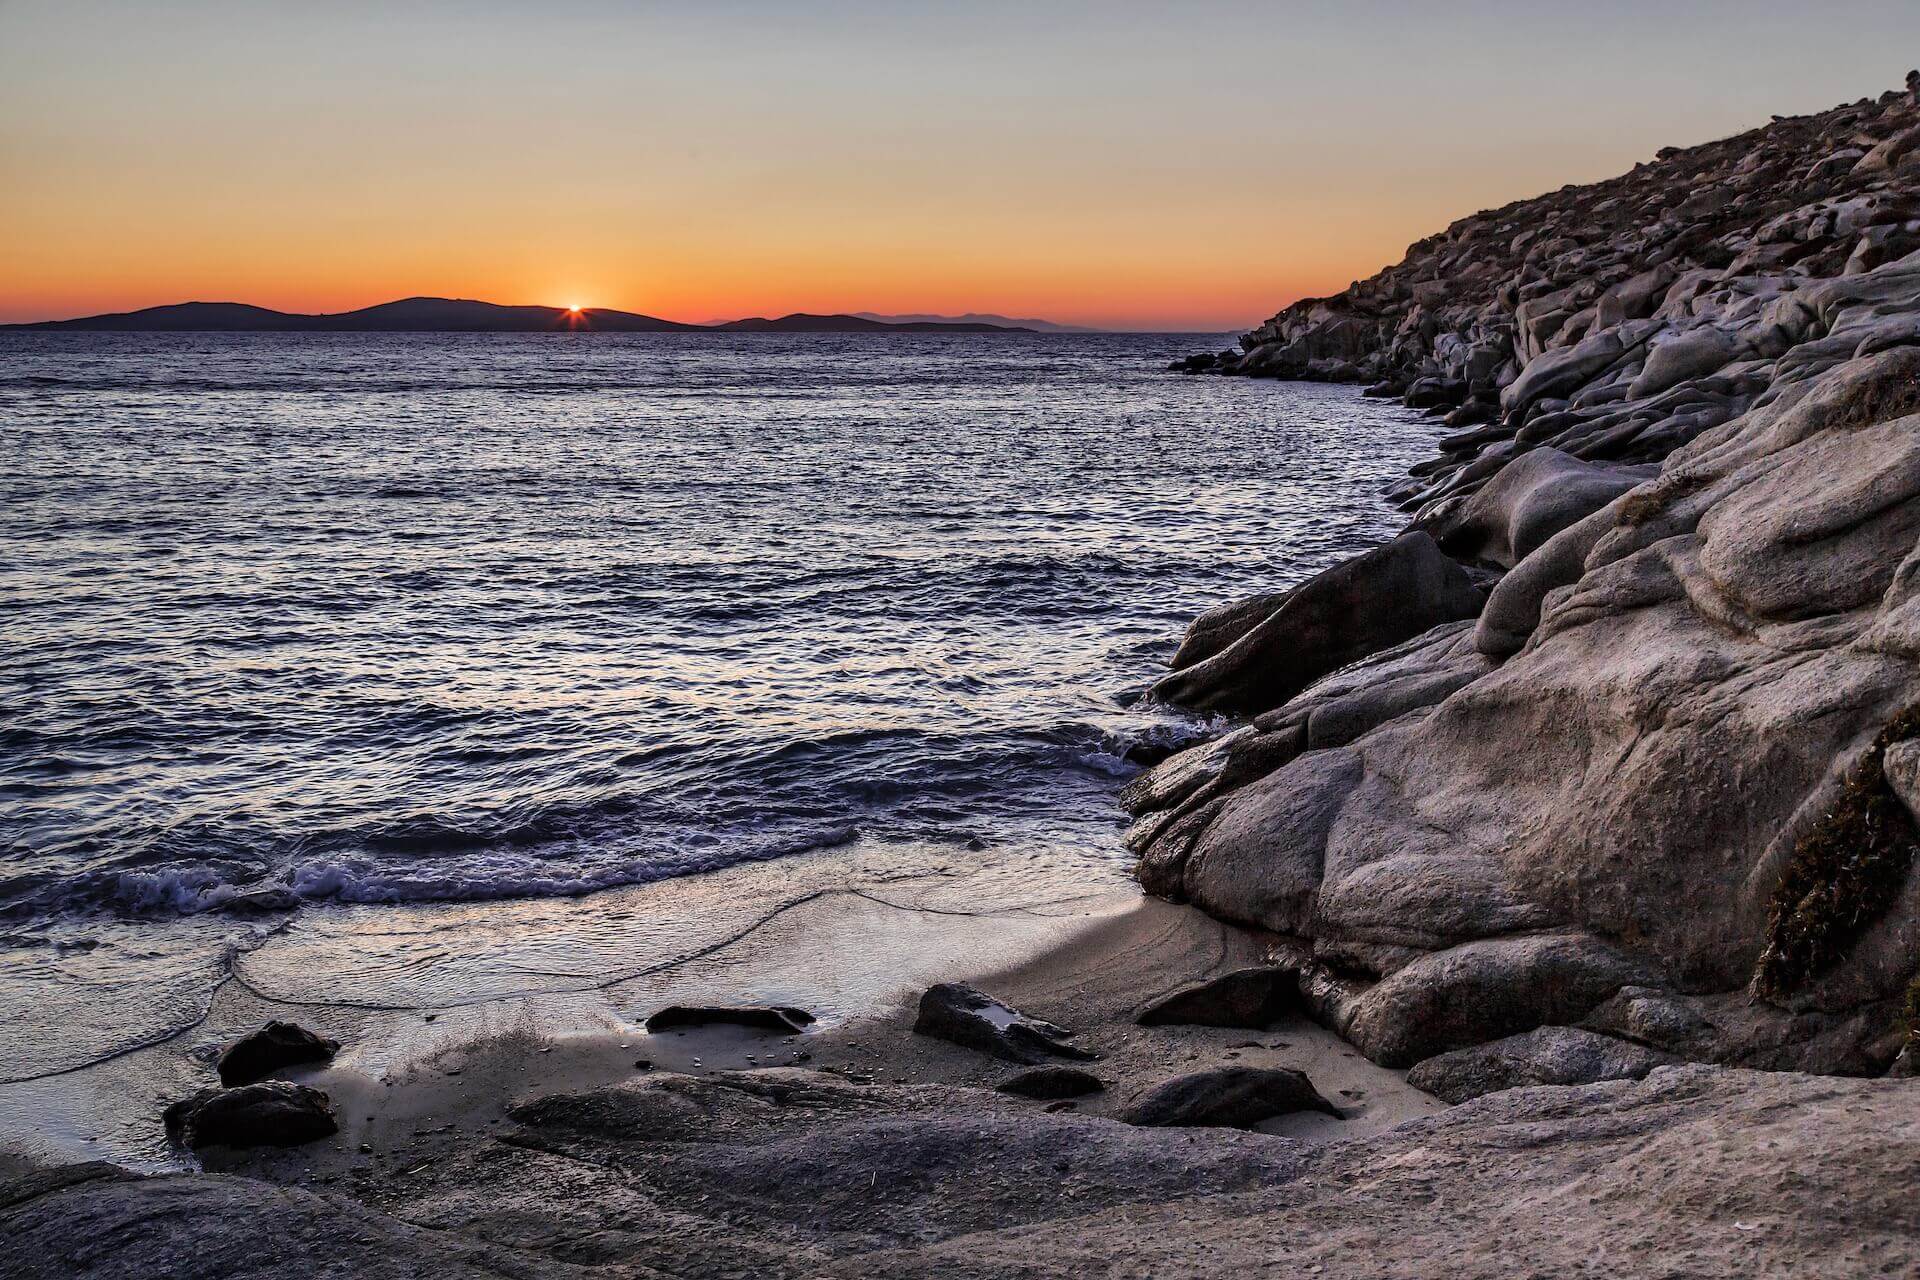 View of a sunset from a beach in Mykonos 